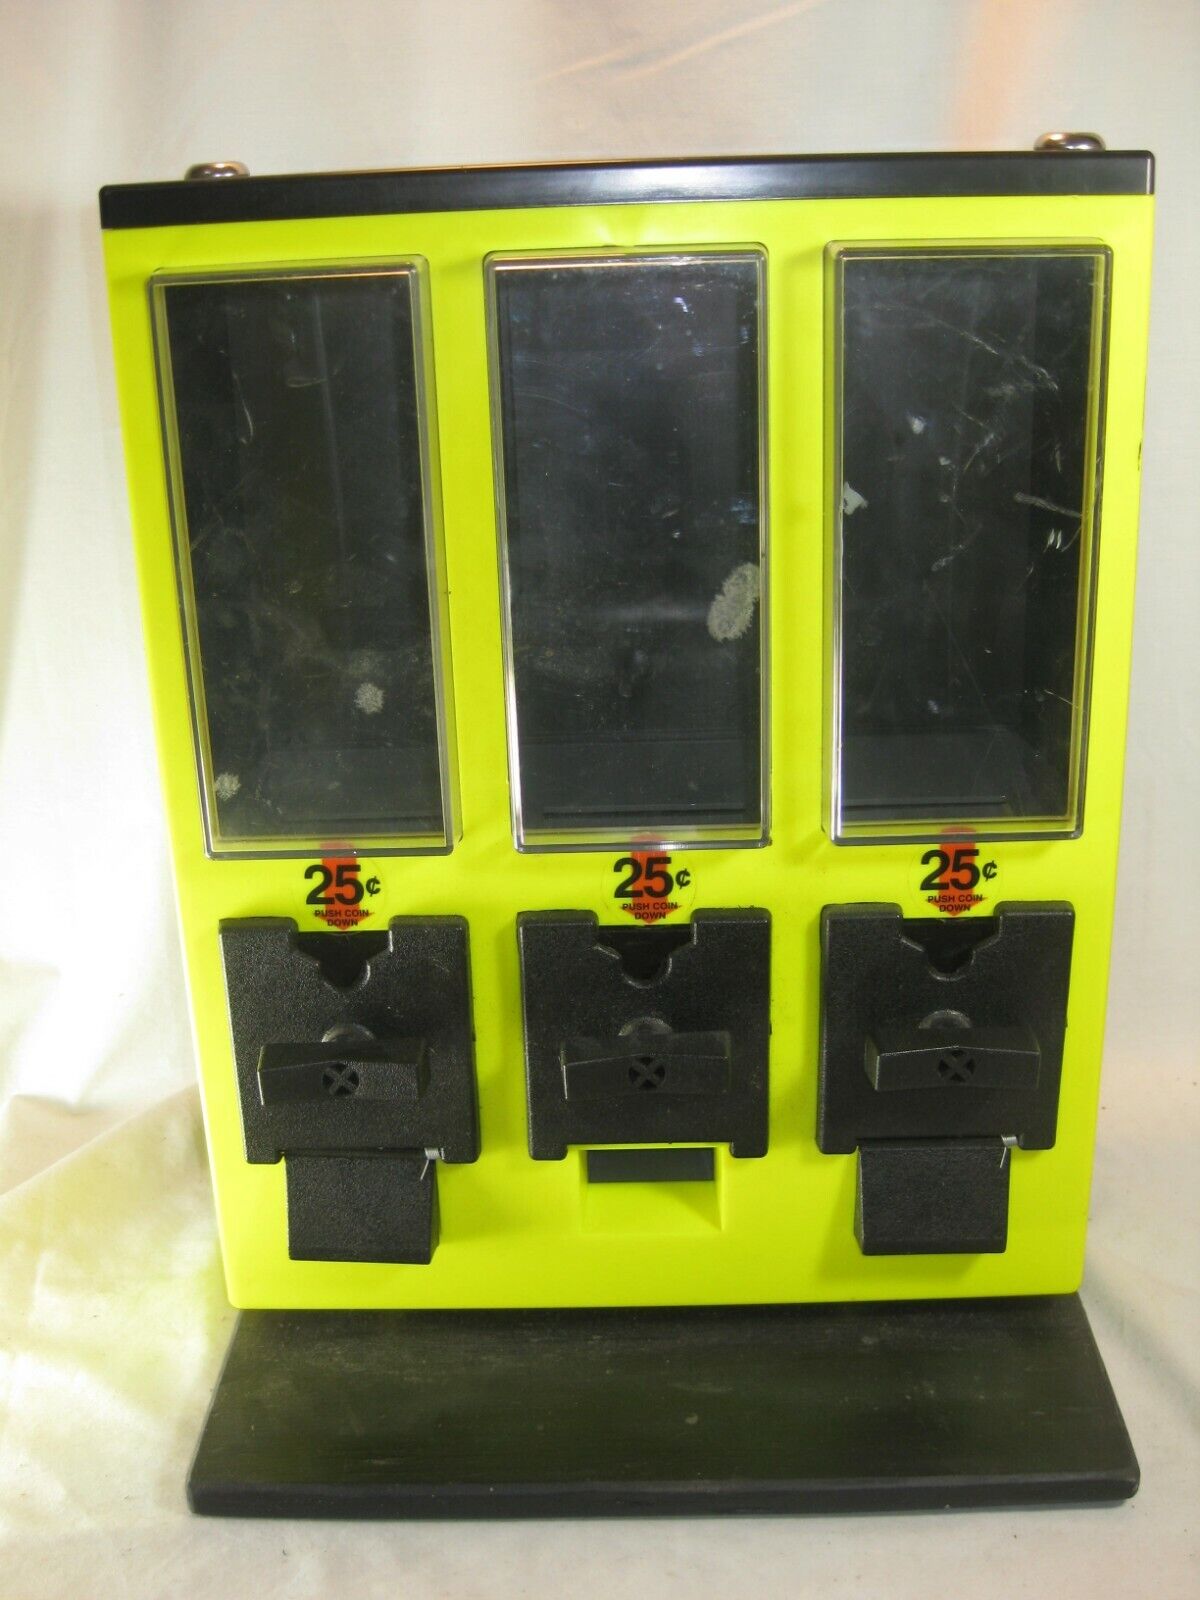 3 Section Quarter 25 Cent Vending Machine Coin Operated Gumball Candy Dispenser